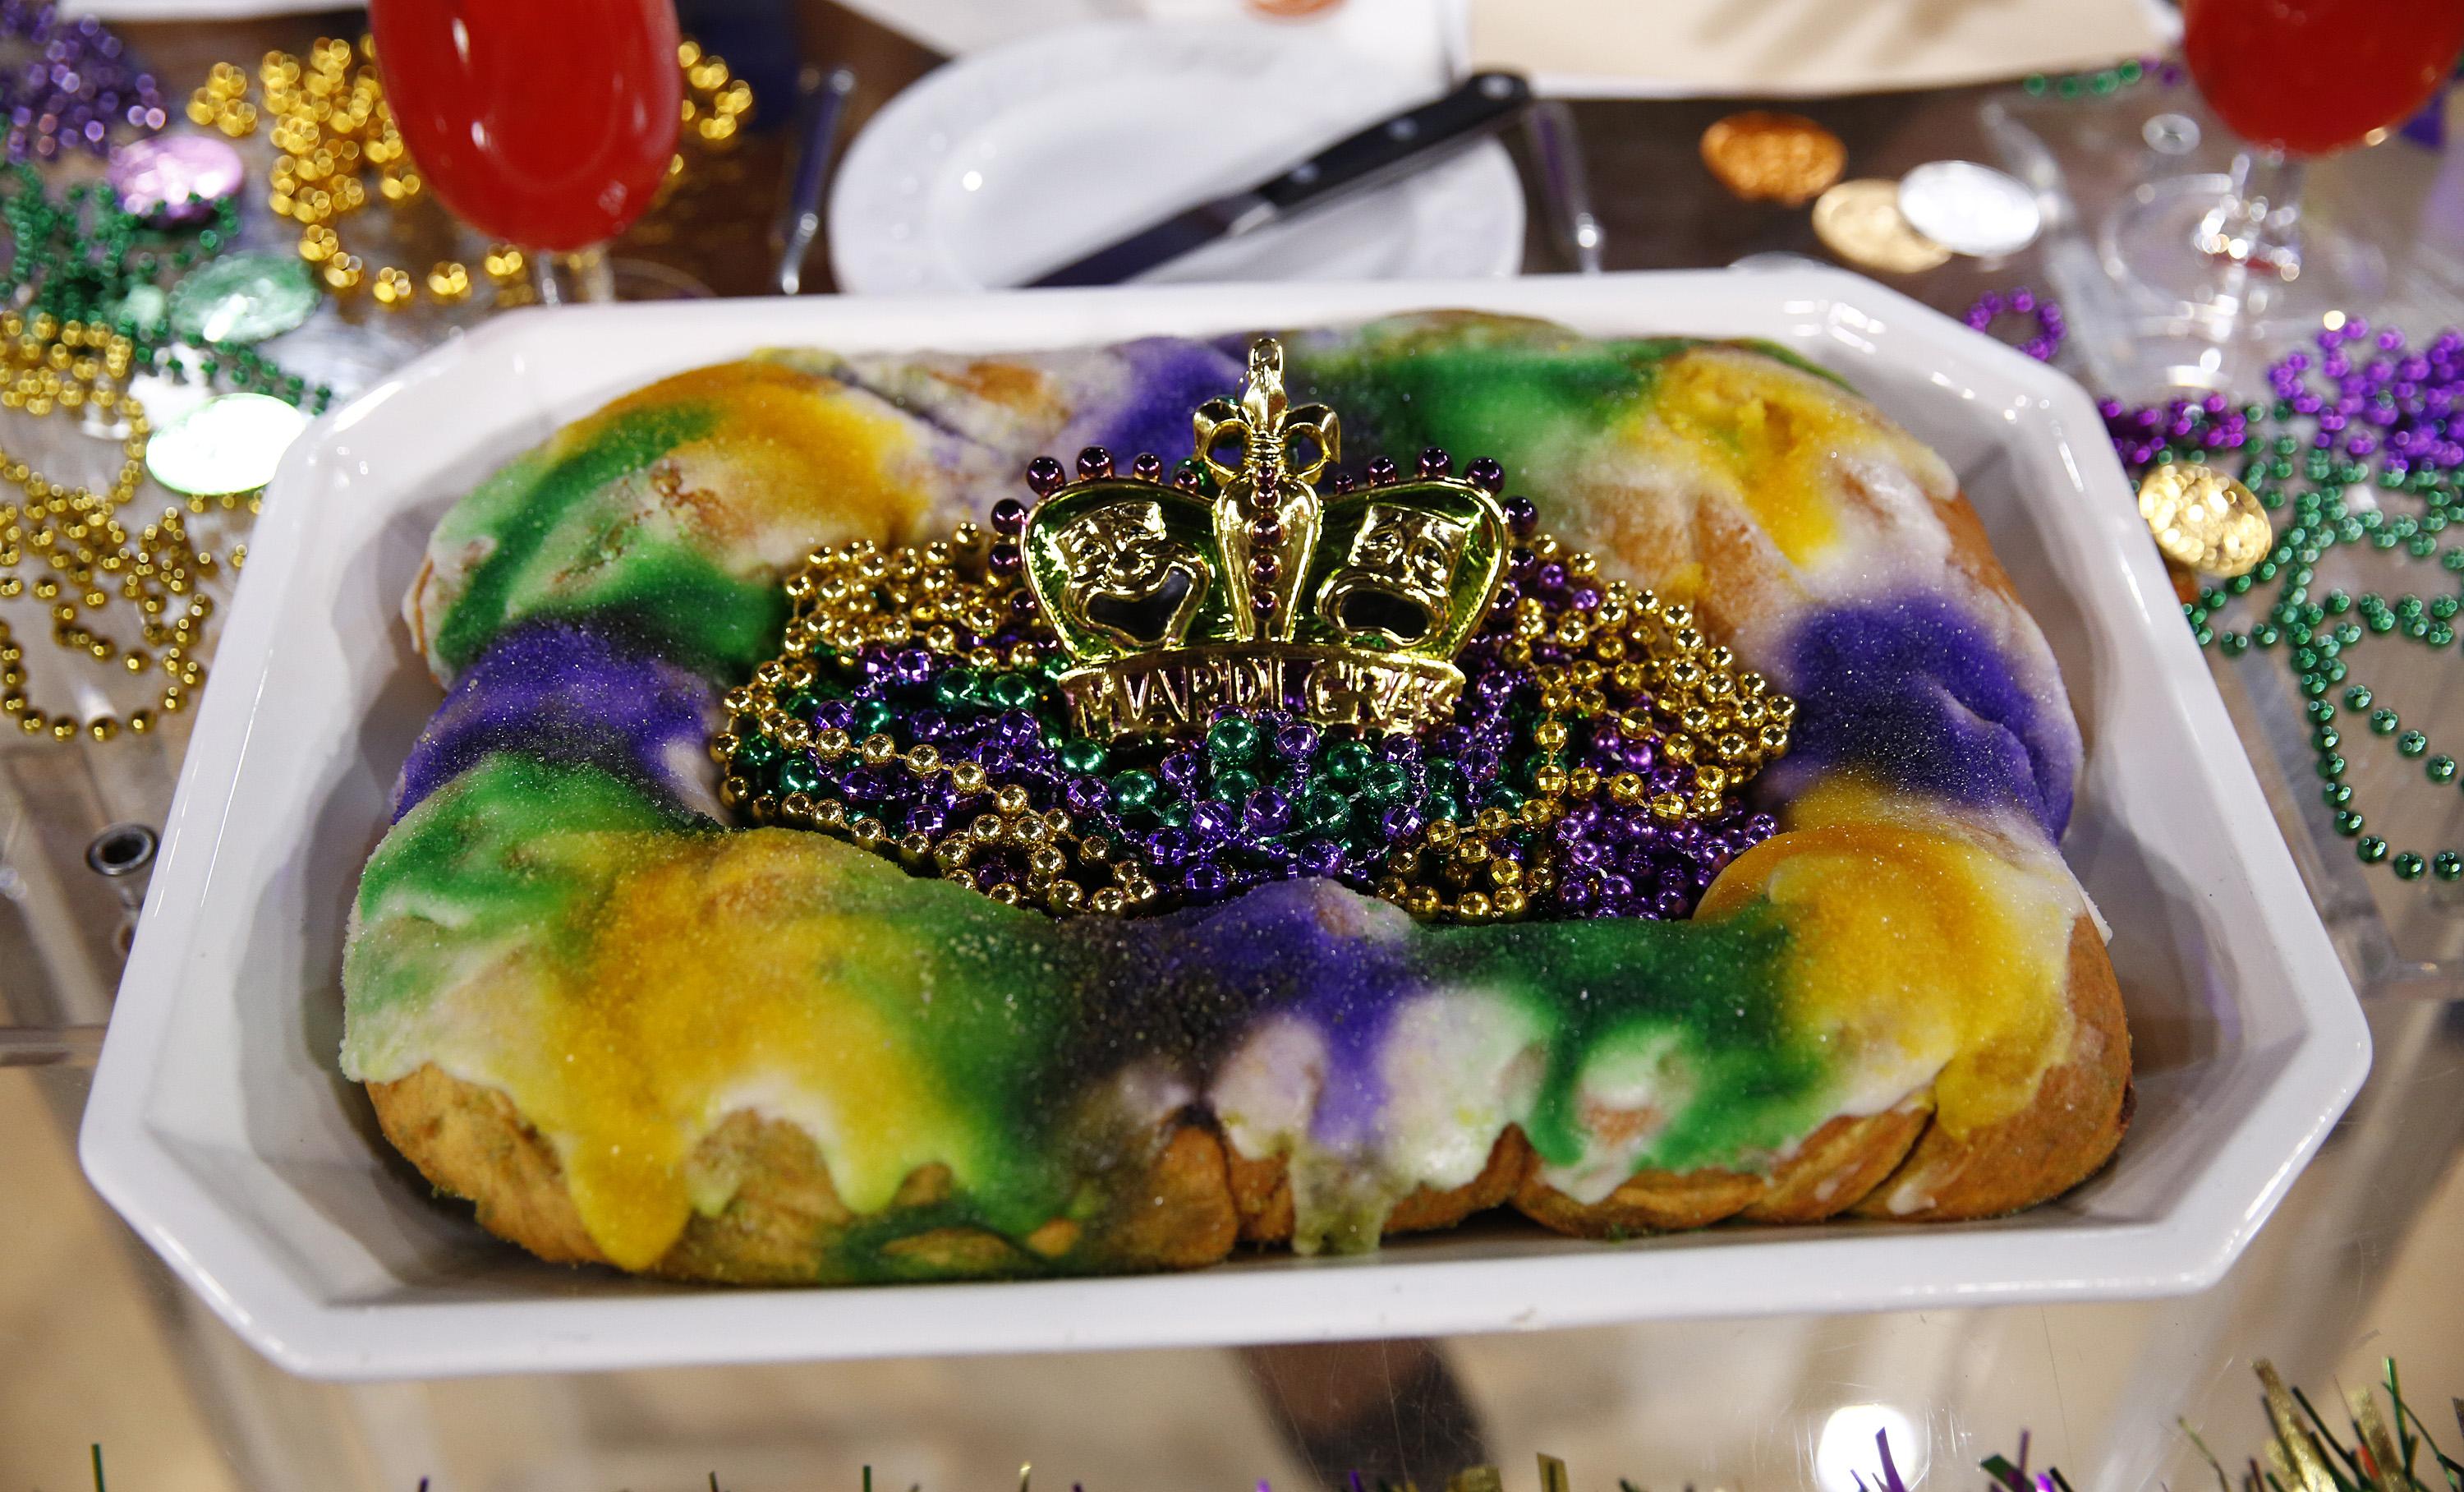 A cake with green, yellow, and purple frosting covered in plastic Mardi Gras beads.